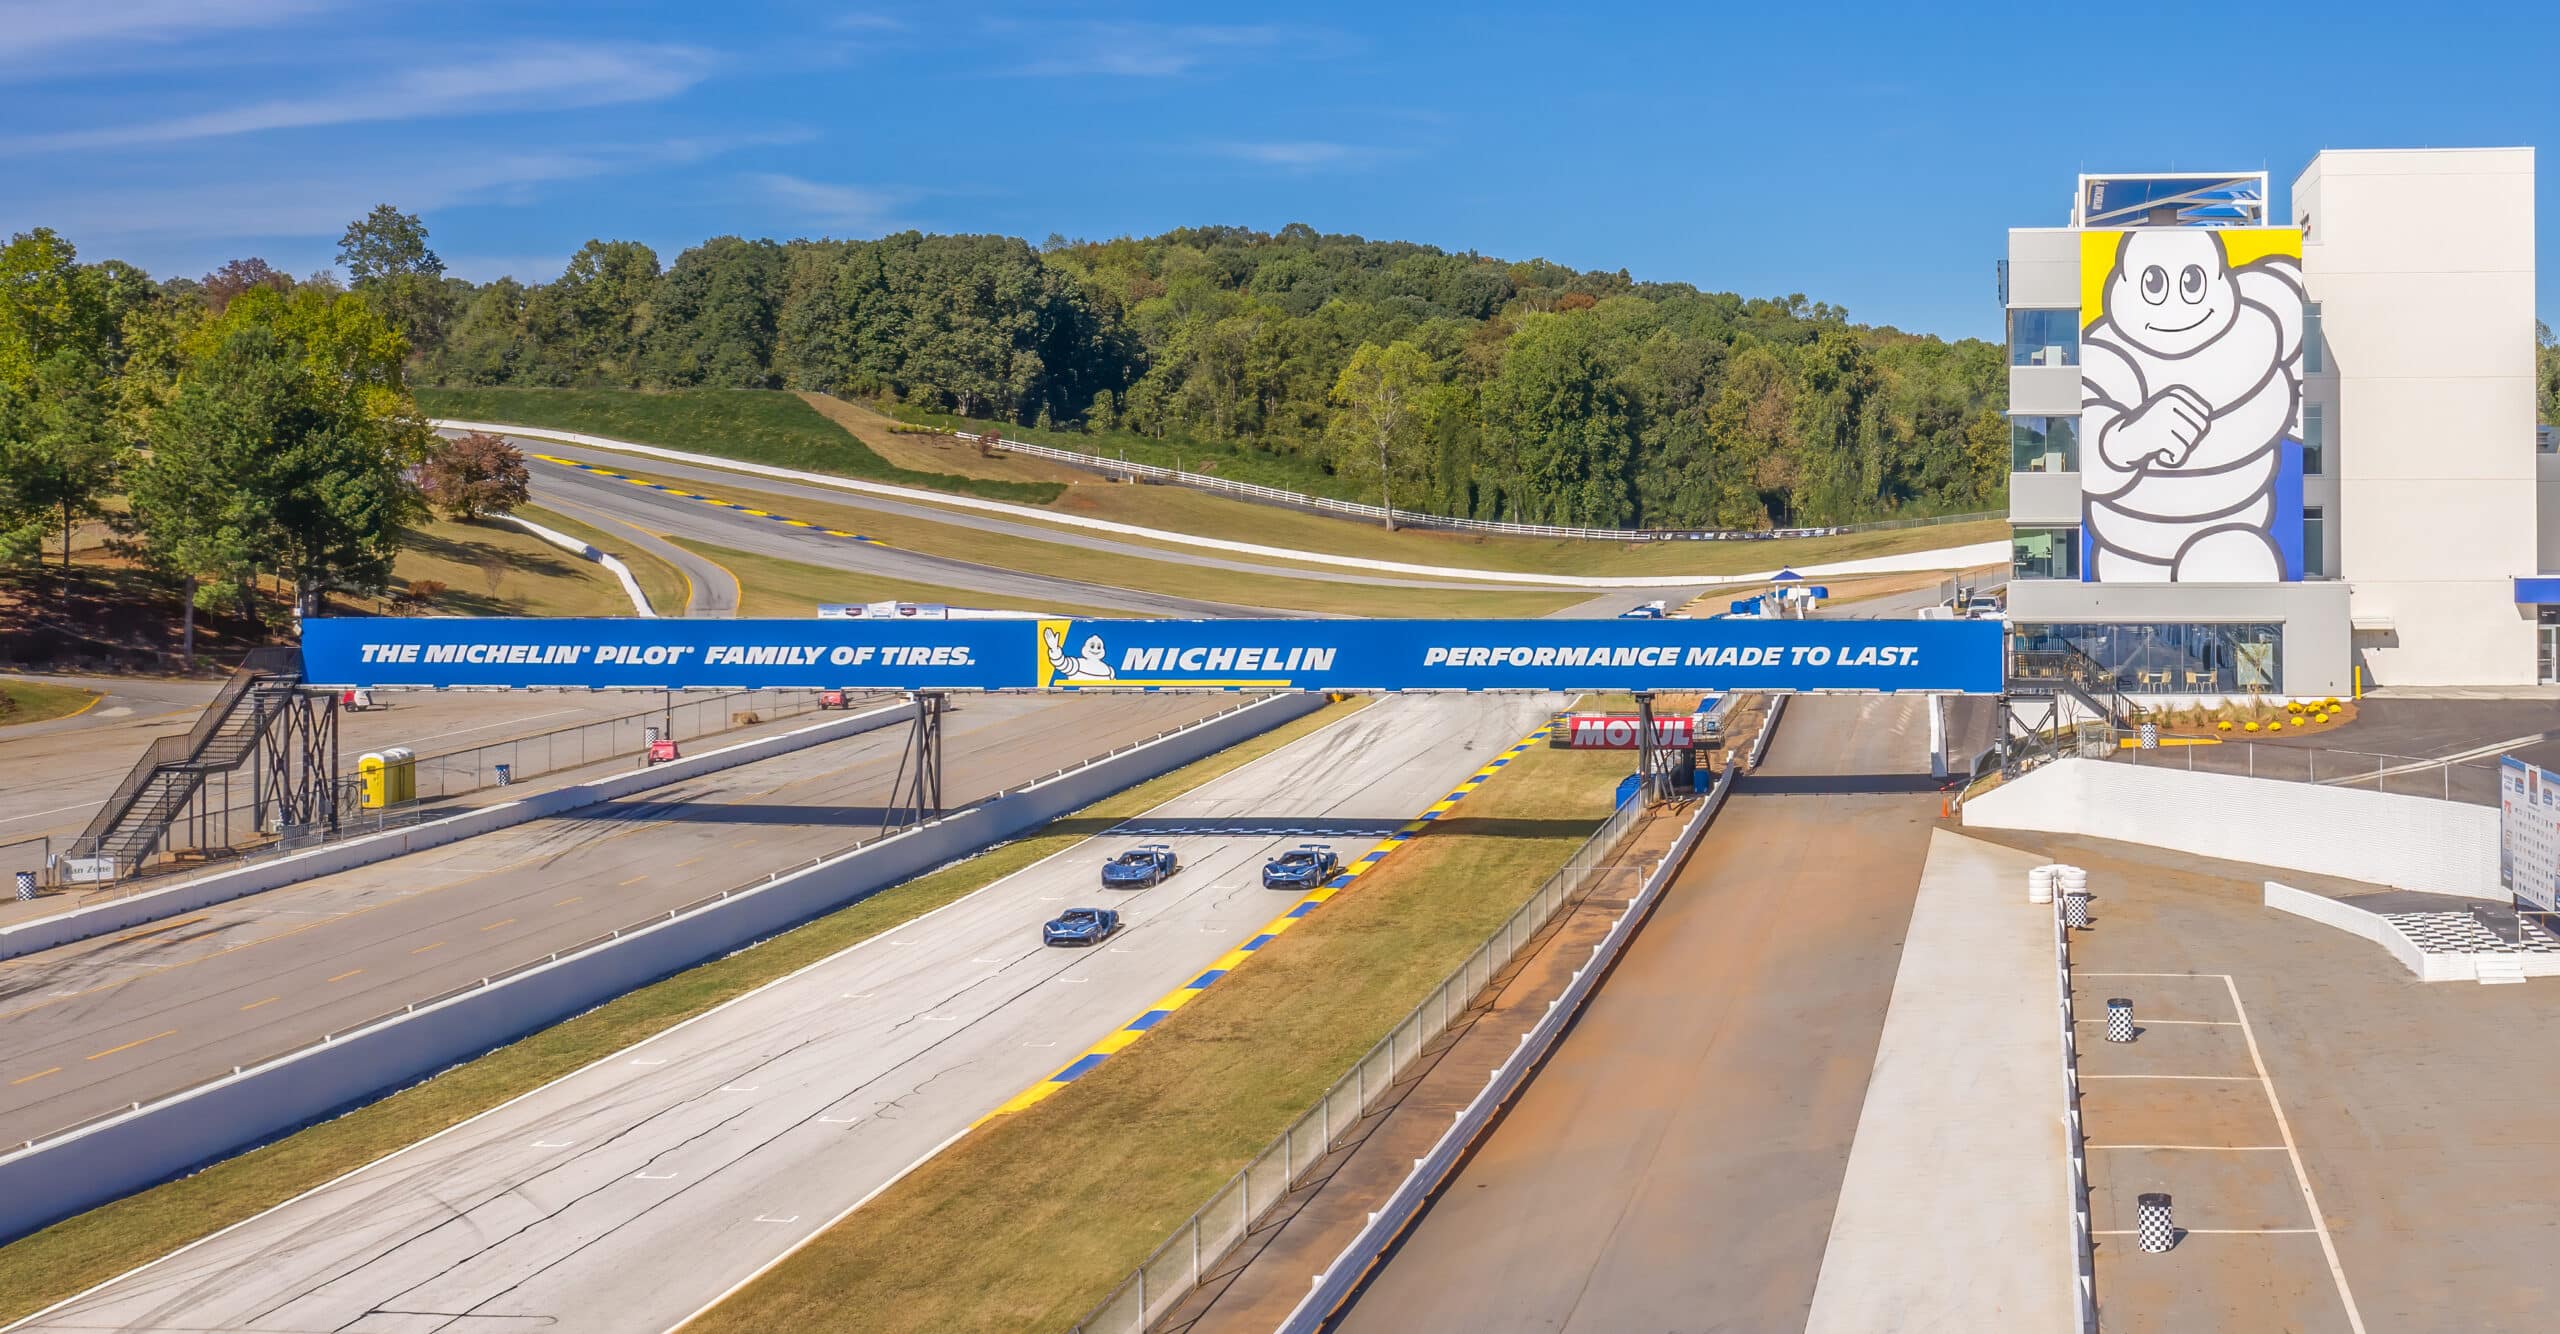 side view of Michelin tower at road Atlanta